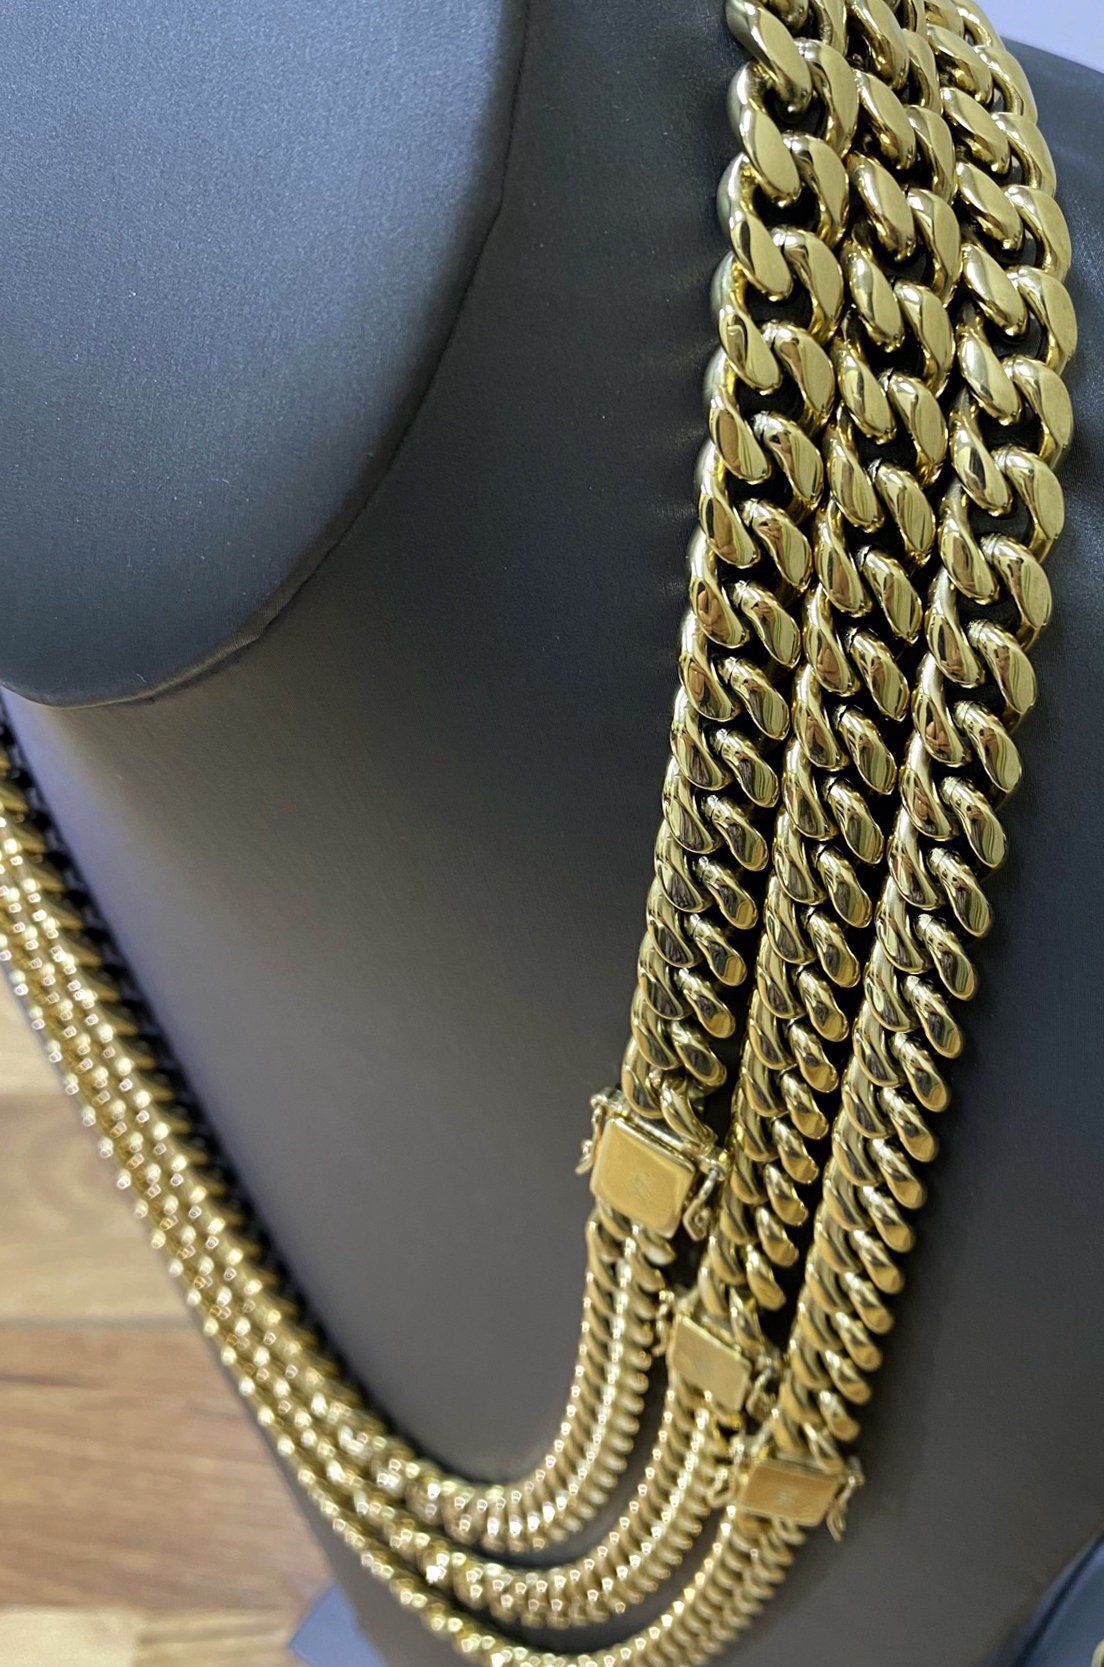 10mm Miami Cuban Chain 14k Gold Filled, Double Safety Lock Box, Chunky Curb Link Chain, Unisex Necklace, Wholesale Jewelry Supplies